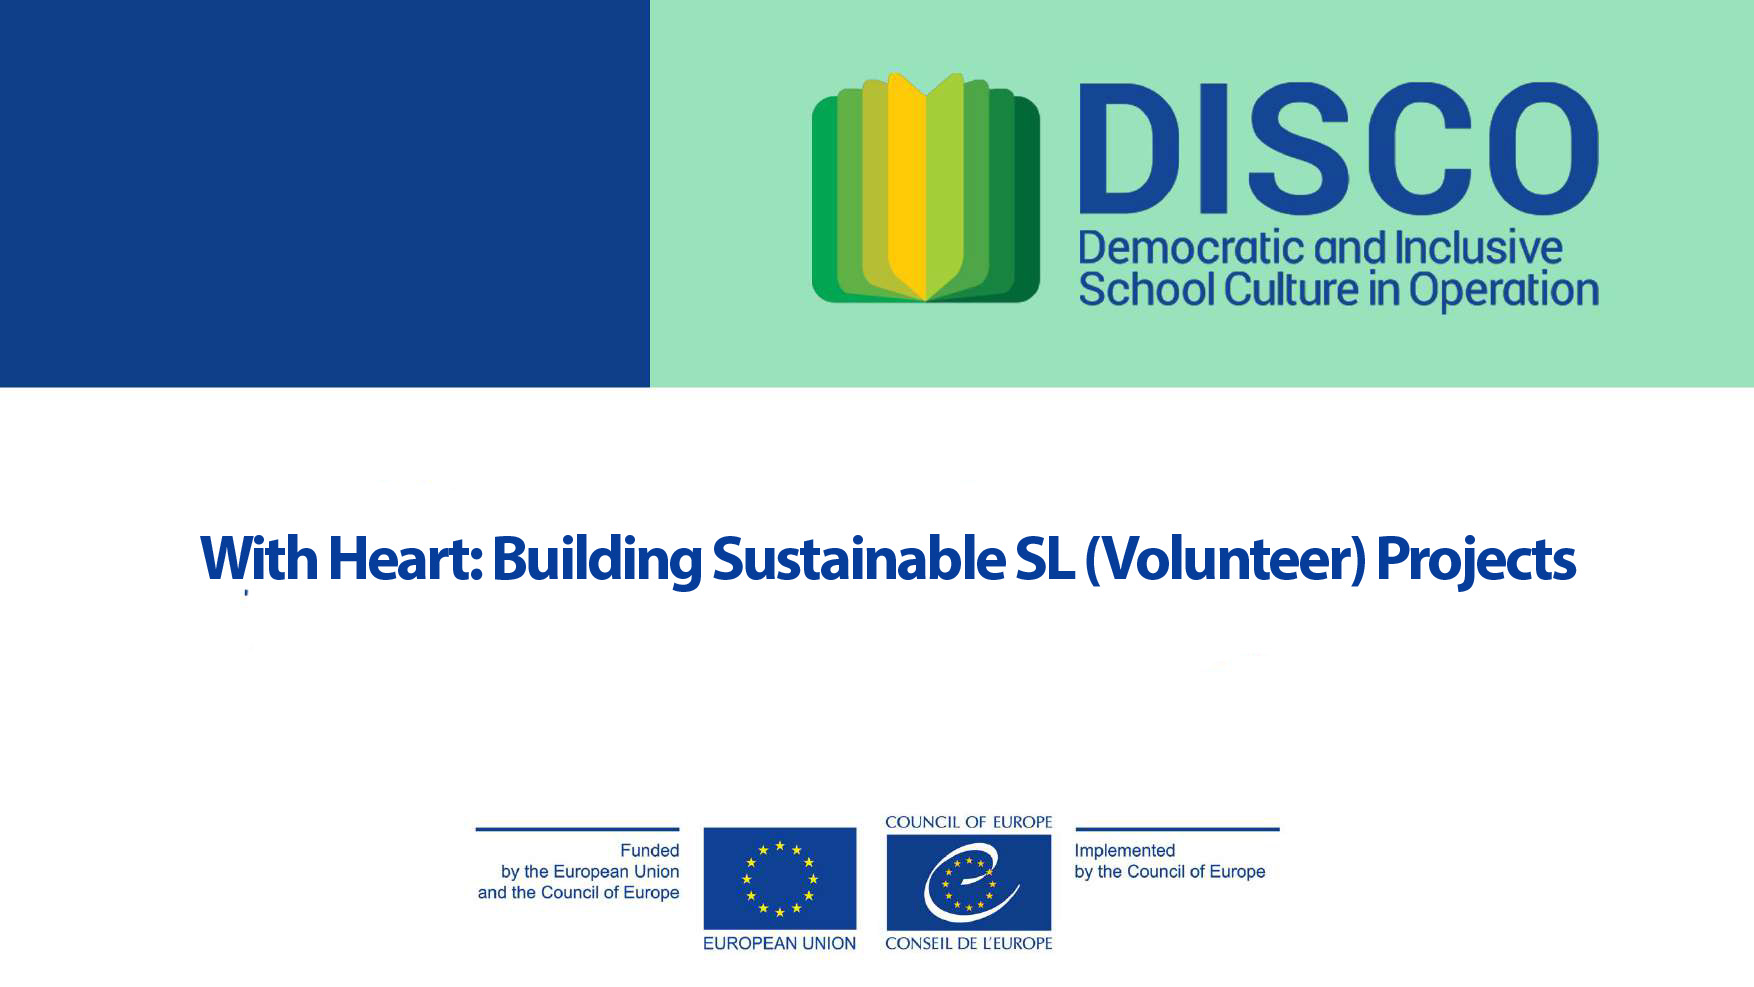 With Heart: Building Sustainable SL (Volunteer) Projects